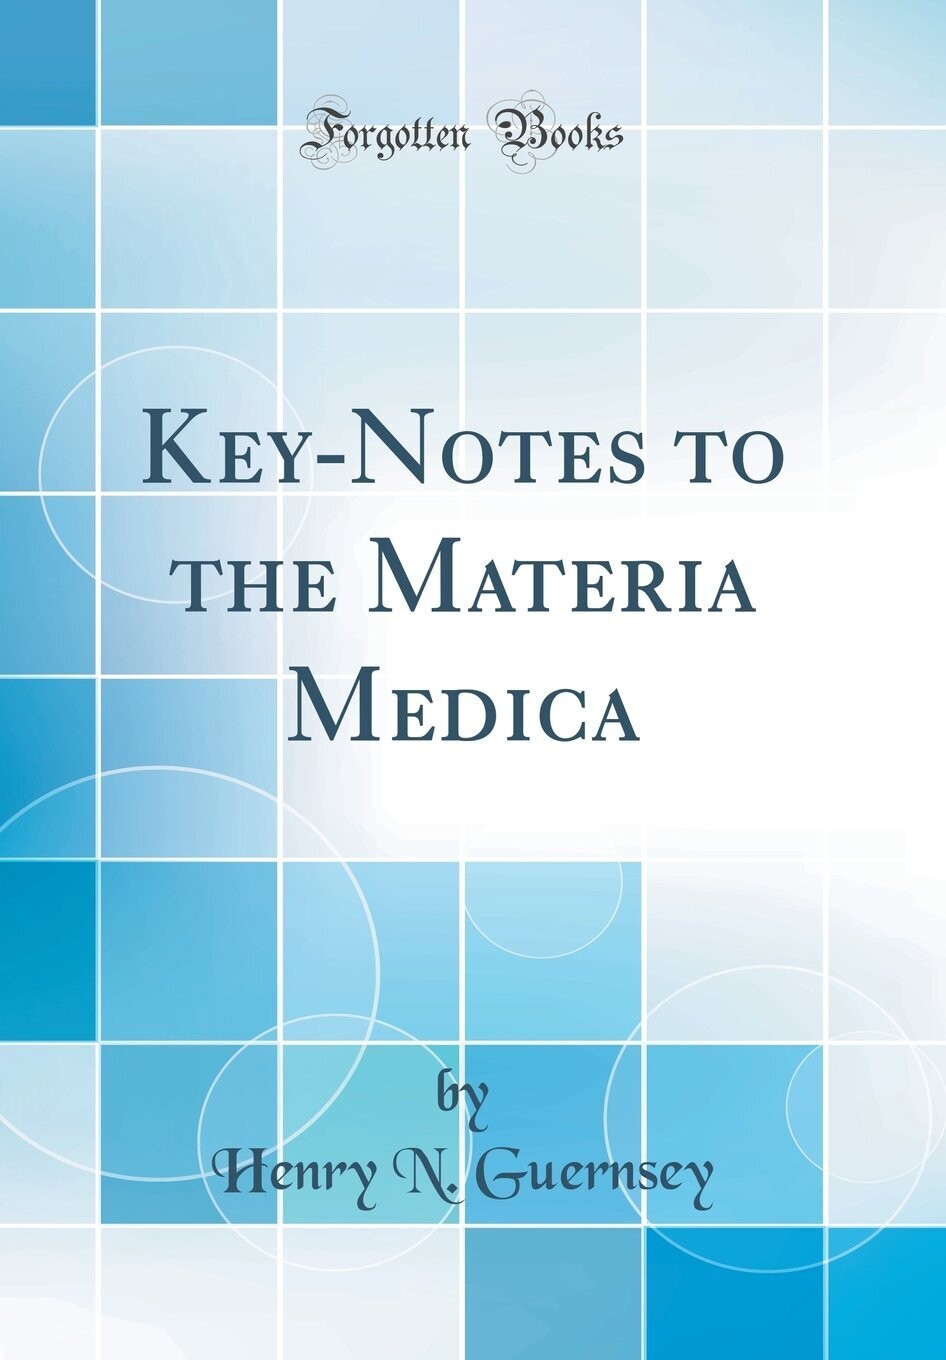 Keynotes to the materia medica* (Guernsey)